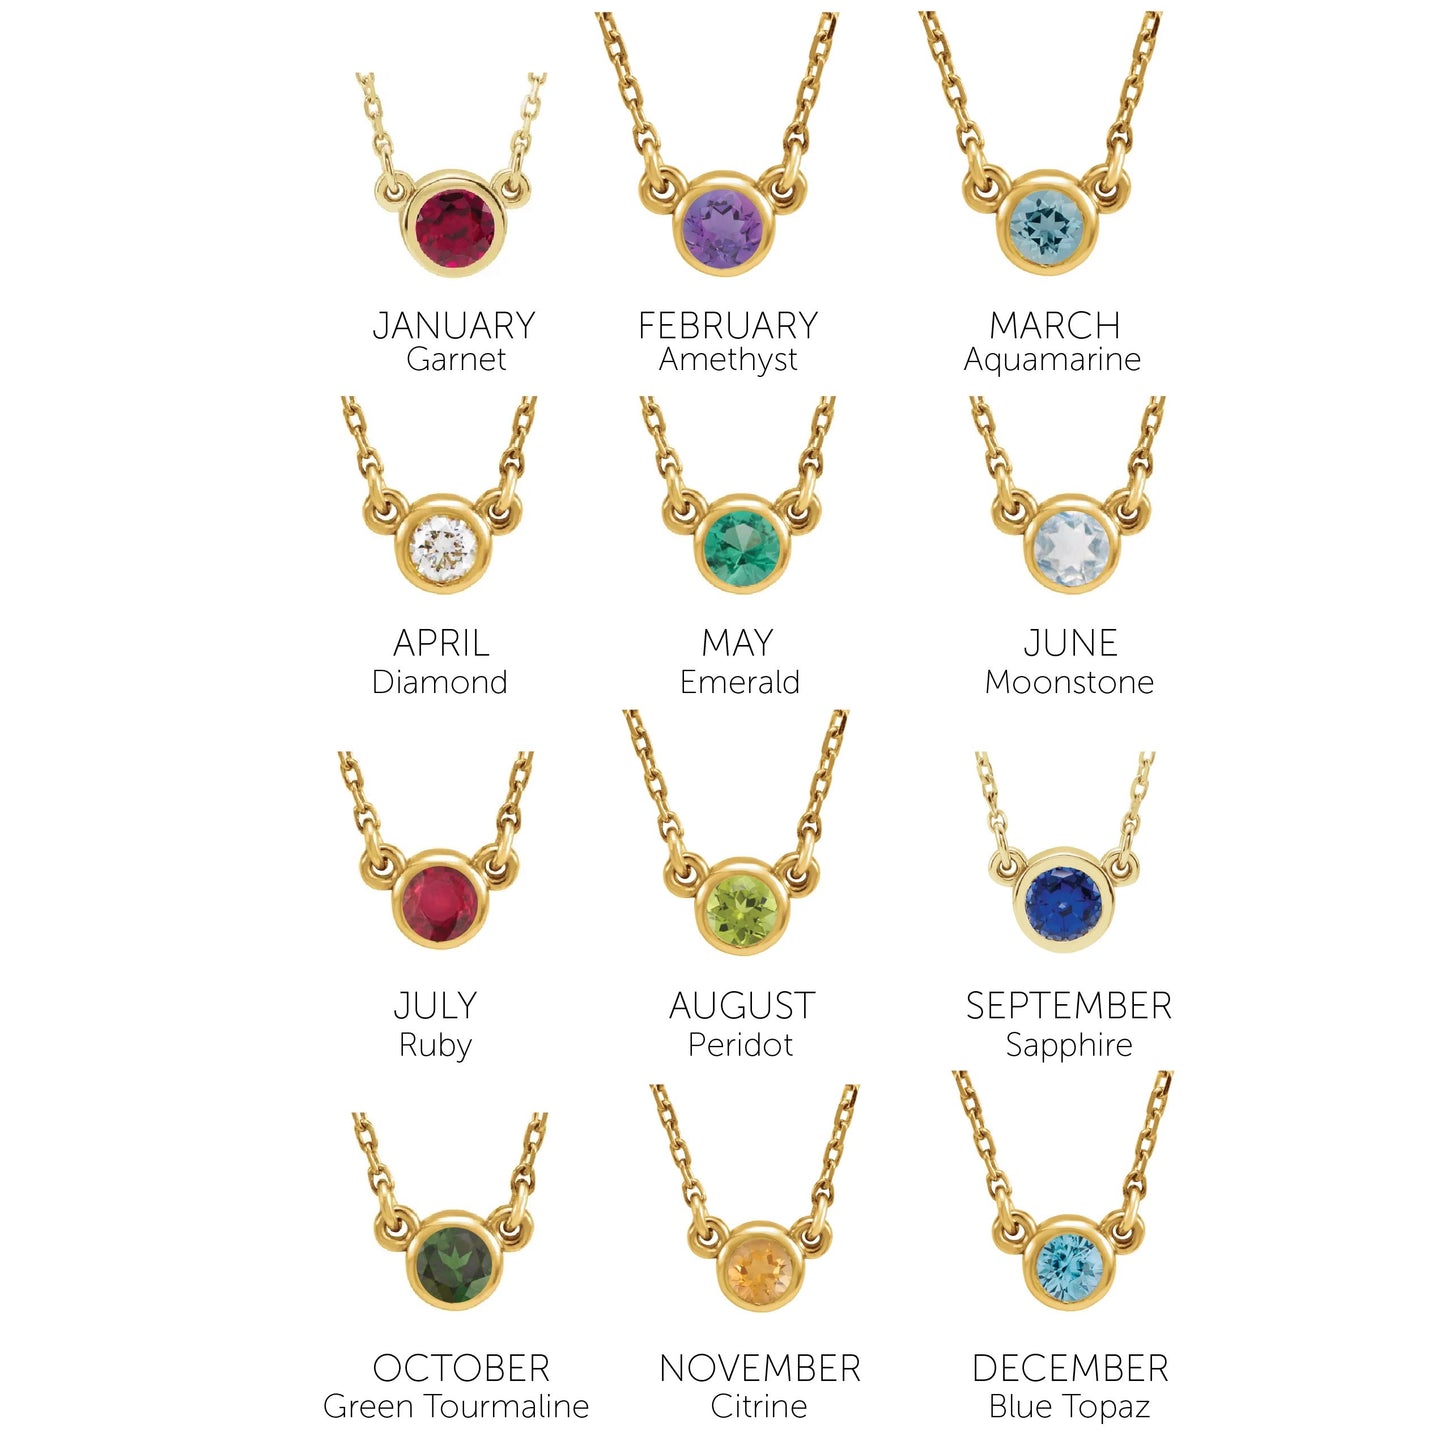 Your Birthstone + Your Cat's Birthstone (3 Cats) Necklace Robyn Canady 